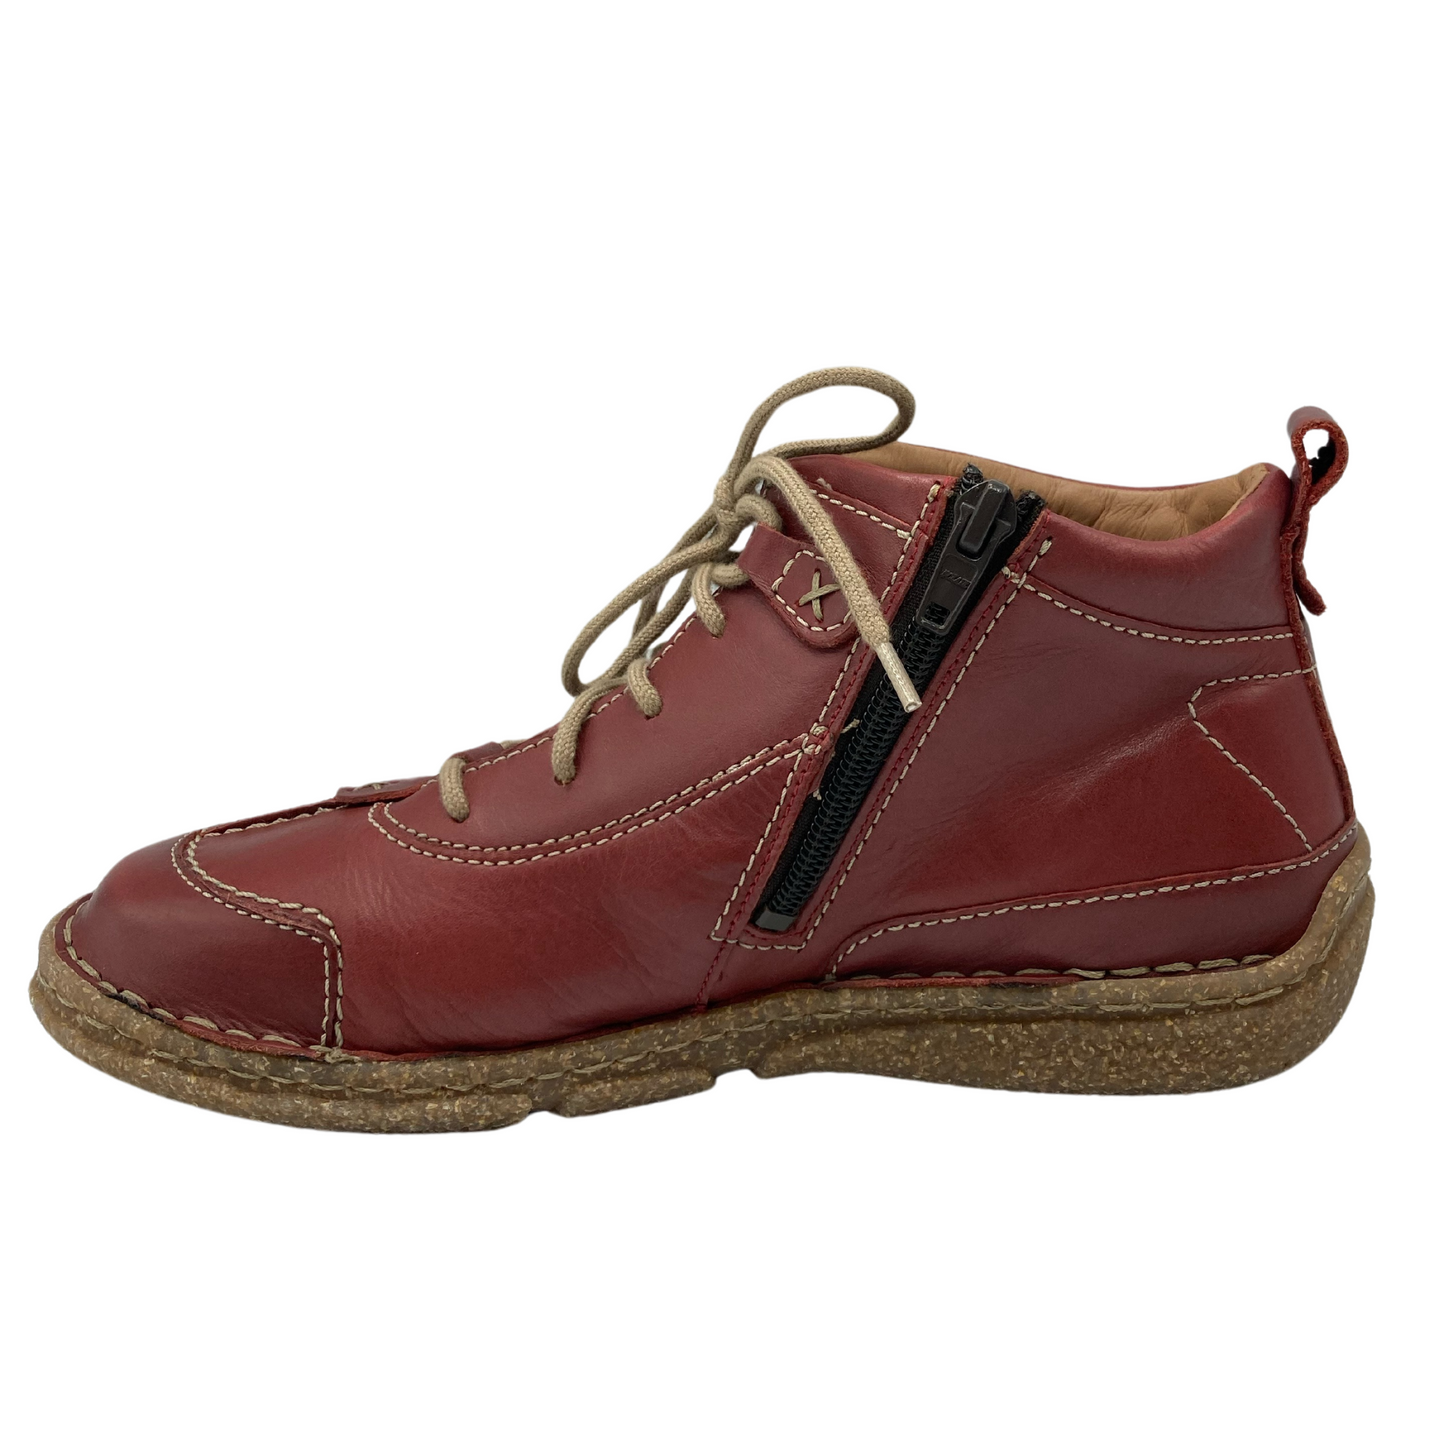 Left facing view of red leather shoe with black side zipper and tan laces